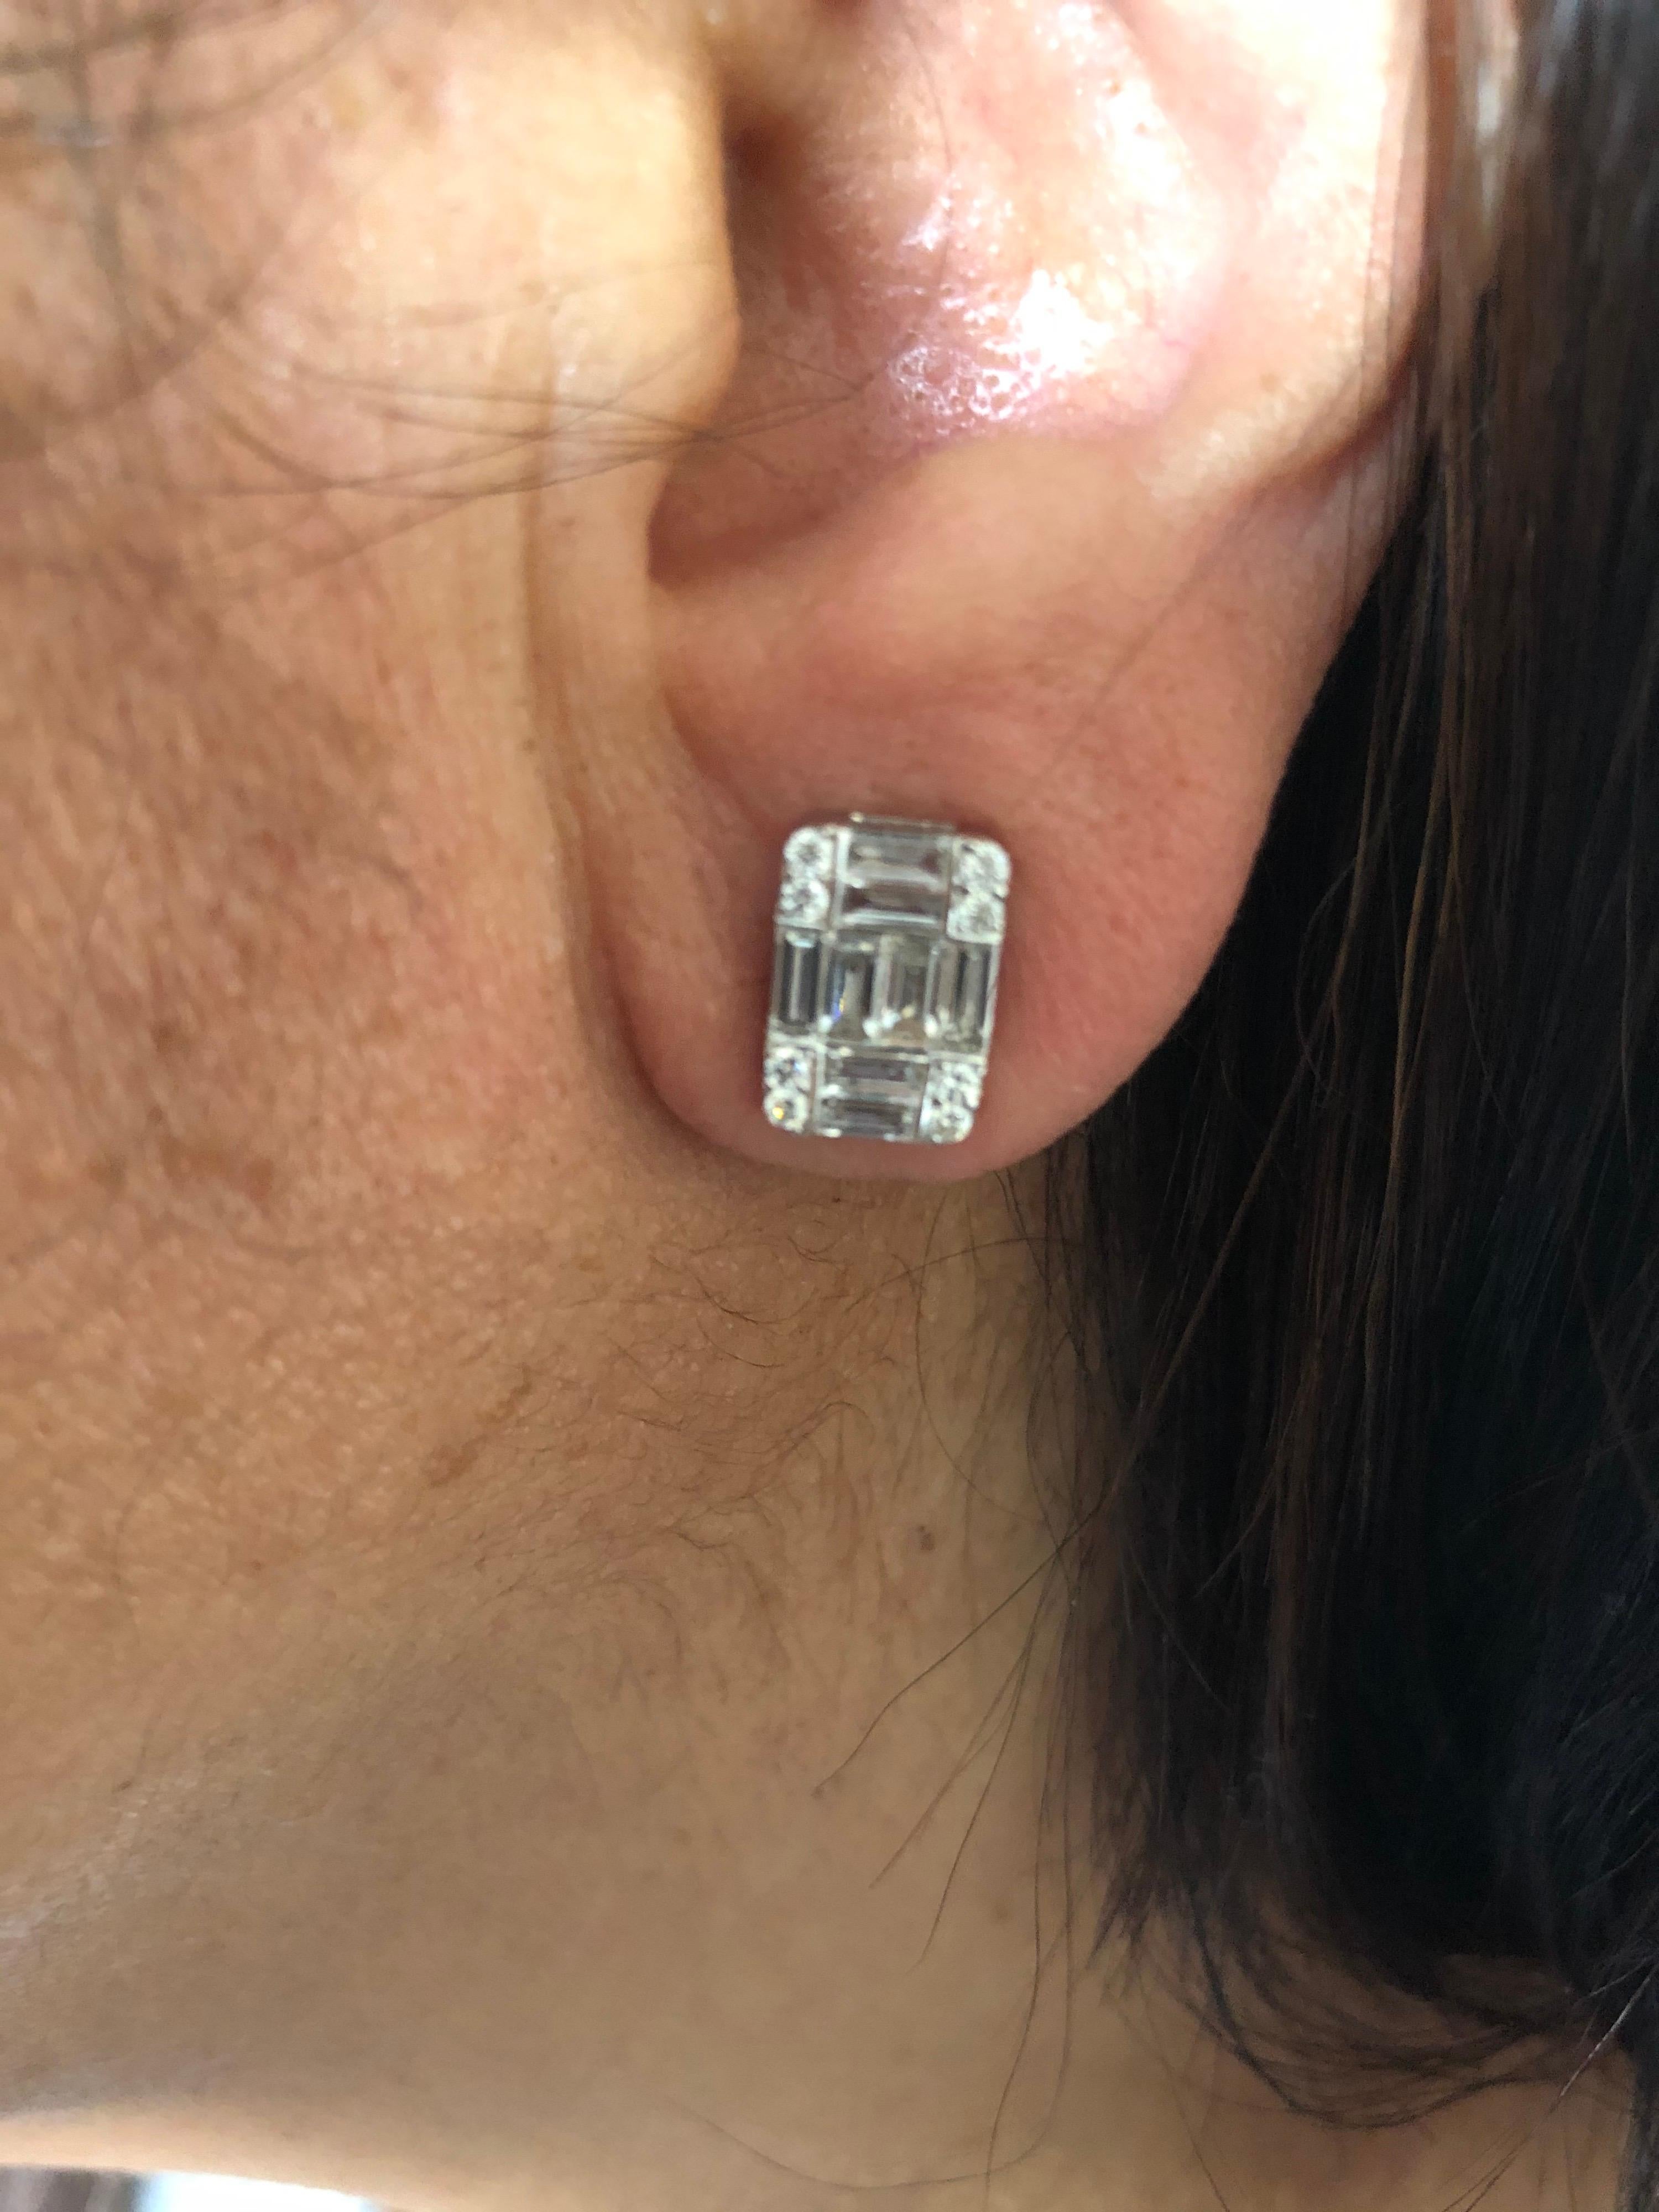 Emerald cut illusion earrings set in 18K white gold. The total carat weight of the earrings is 3.52 carats. The earrings are a cluster of baguette and round diamonds that create the illusion of a single emerald cut. The color of the stones are F,